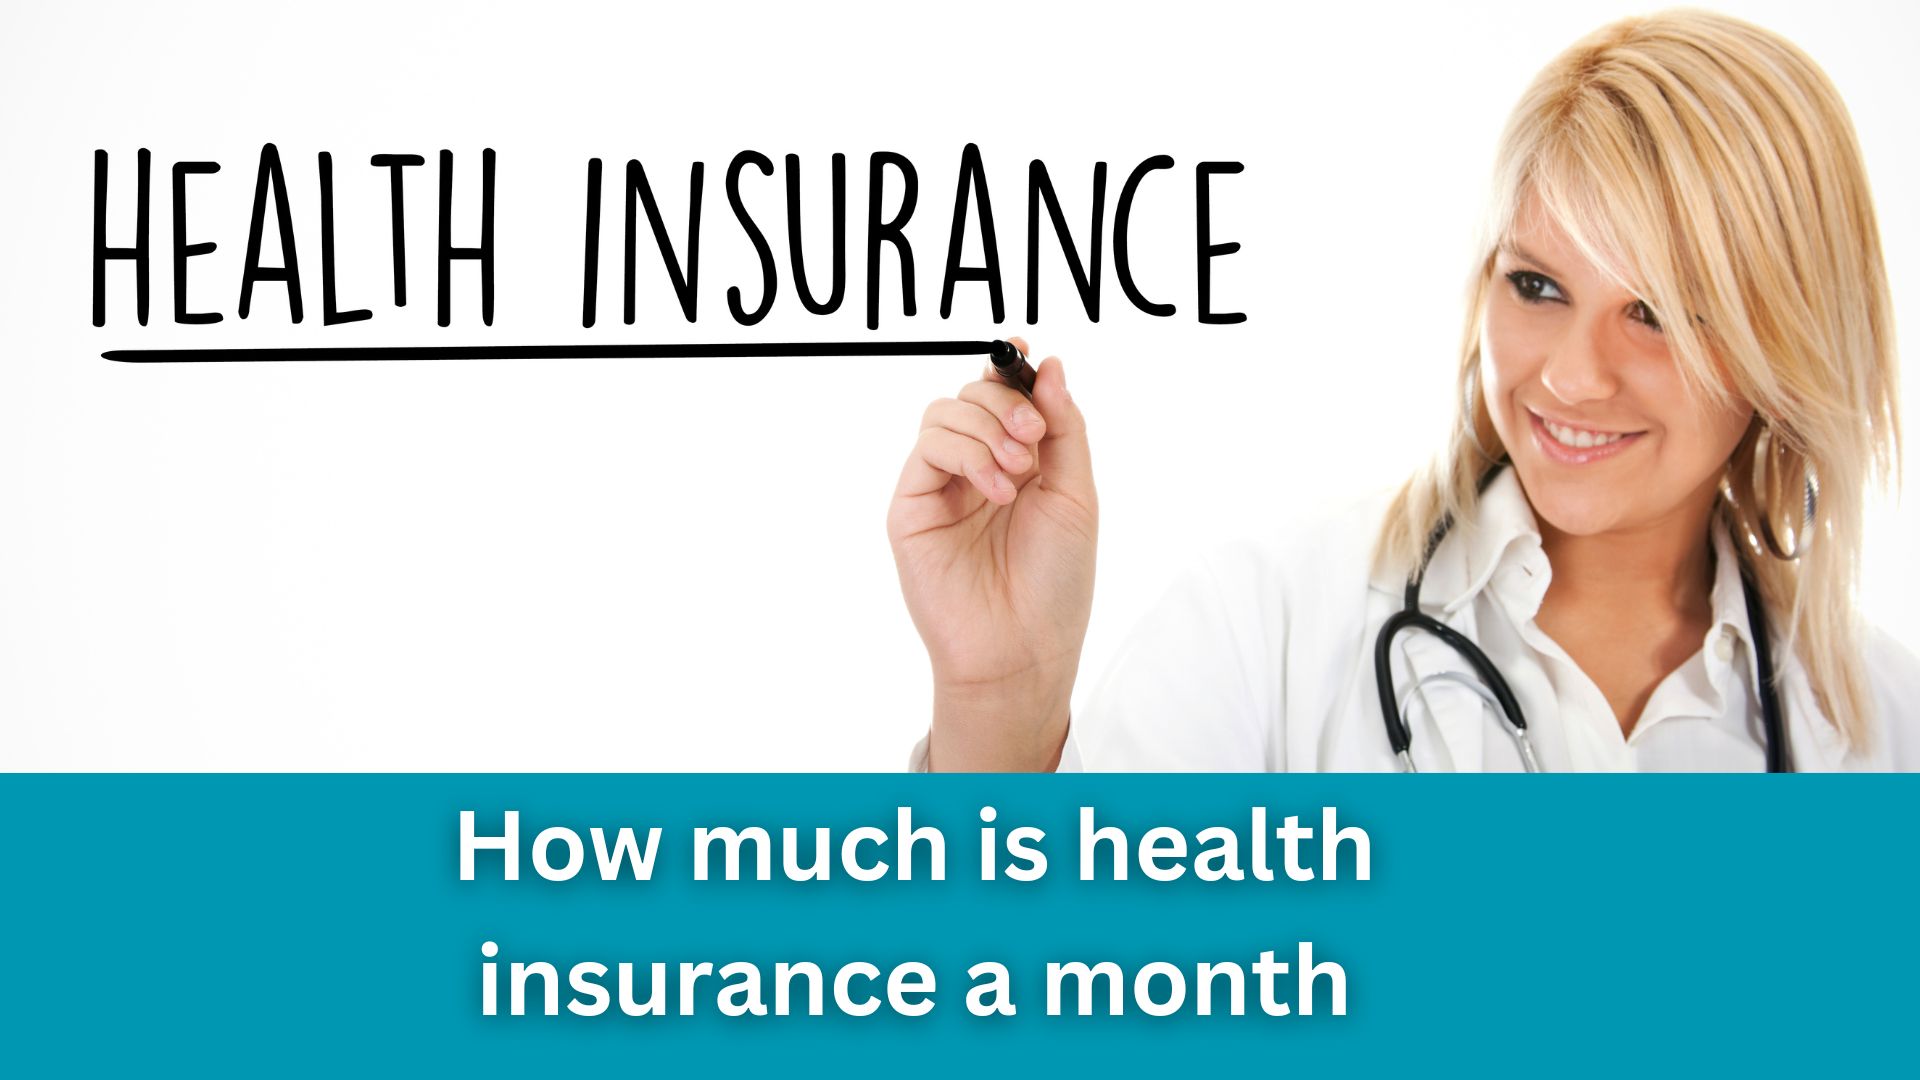 How much is health insurance a month